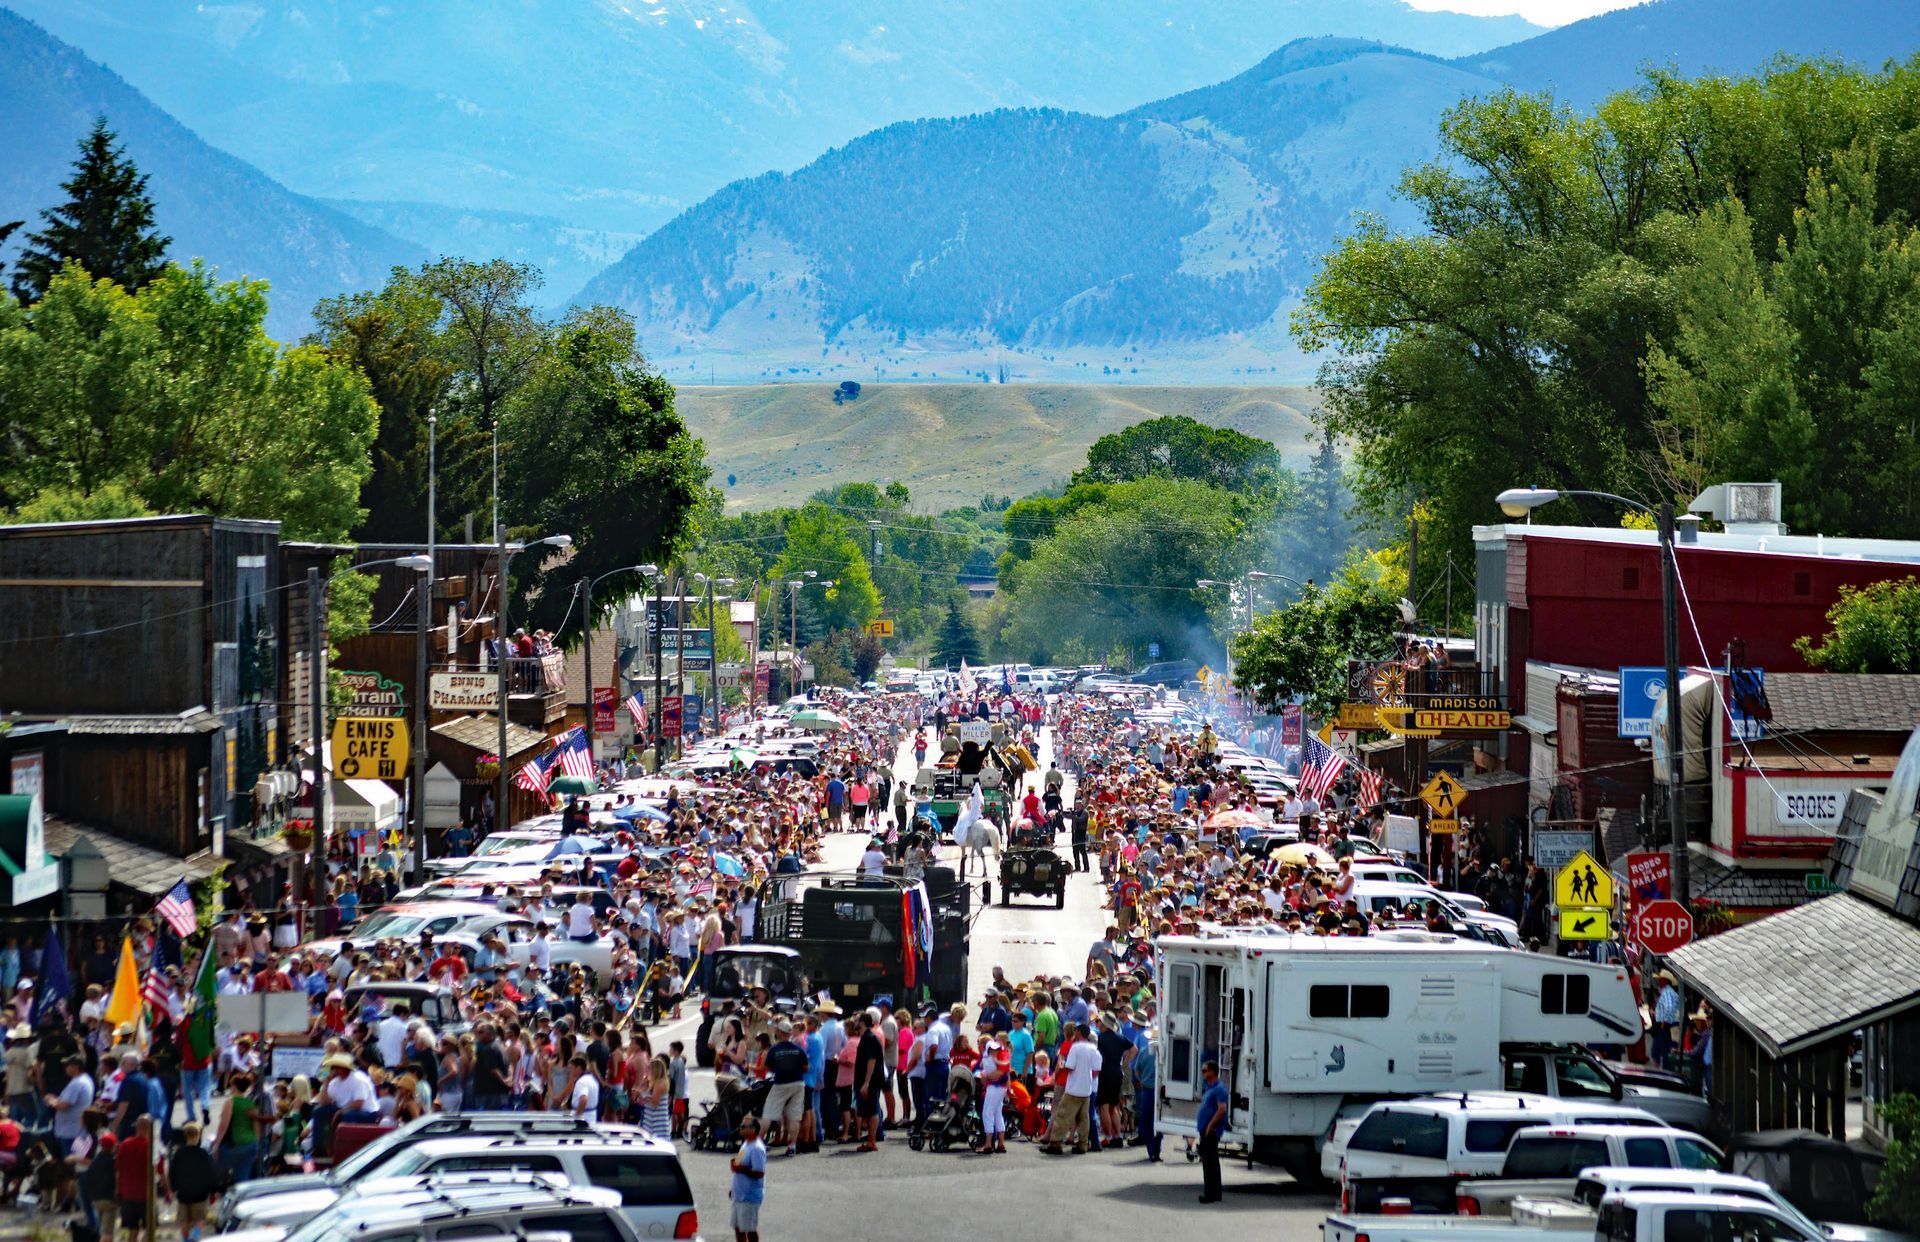 A crowded street with mountains in the background